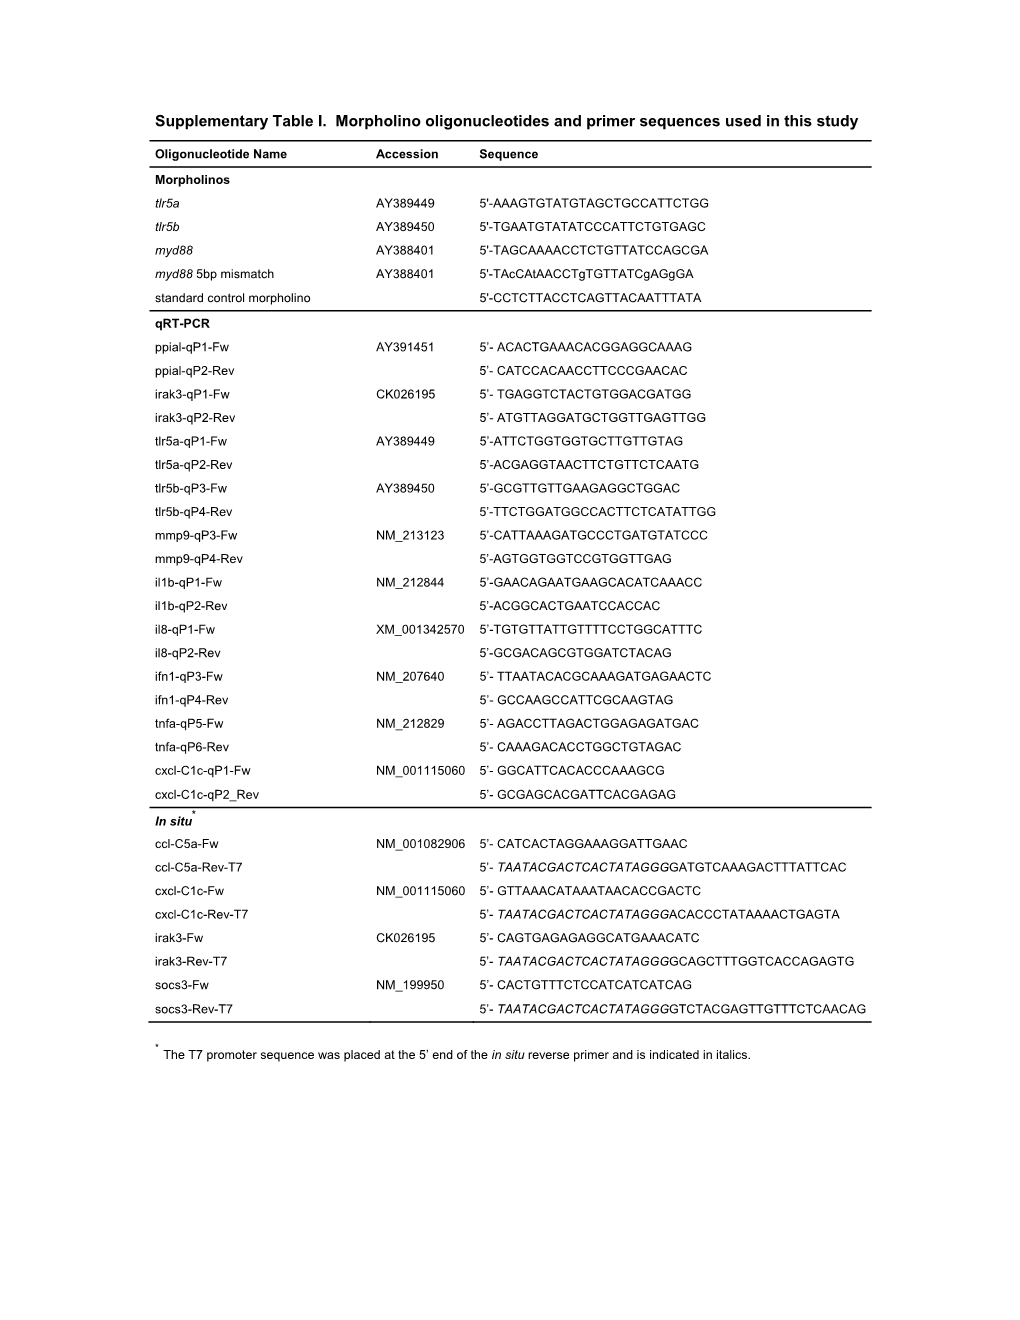 Supplementary Table I. Morpholino Oligonucleotides and Primer Sequences Used in This Study